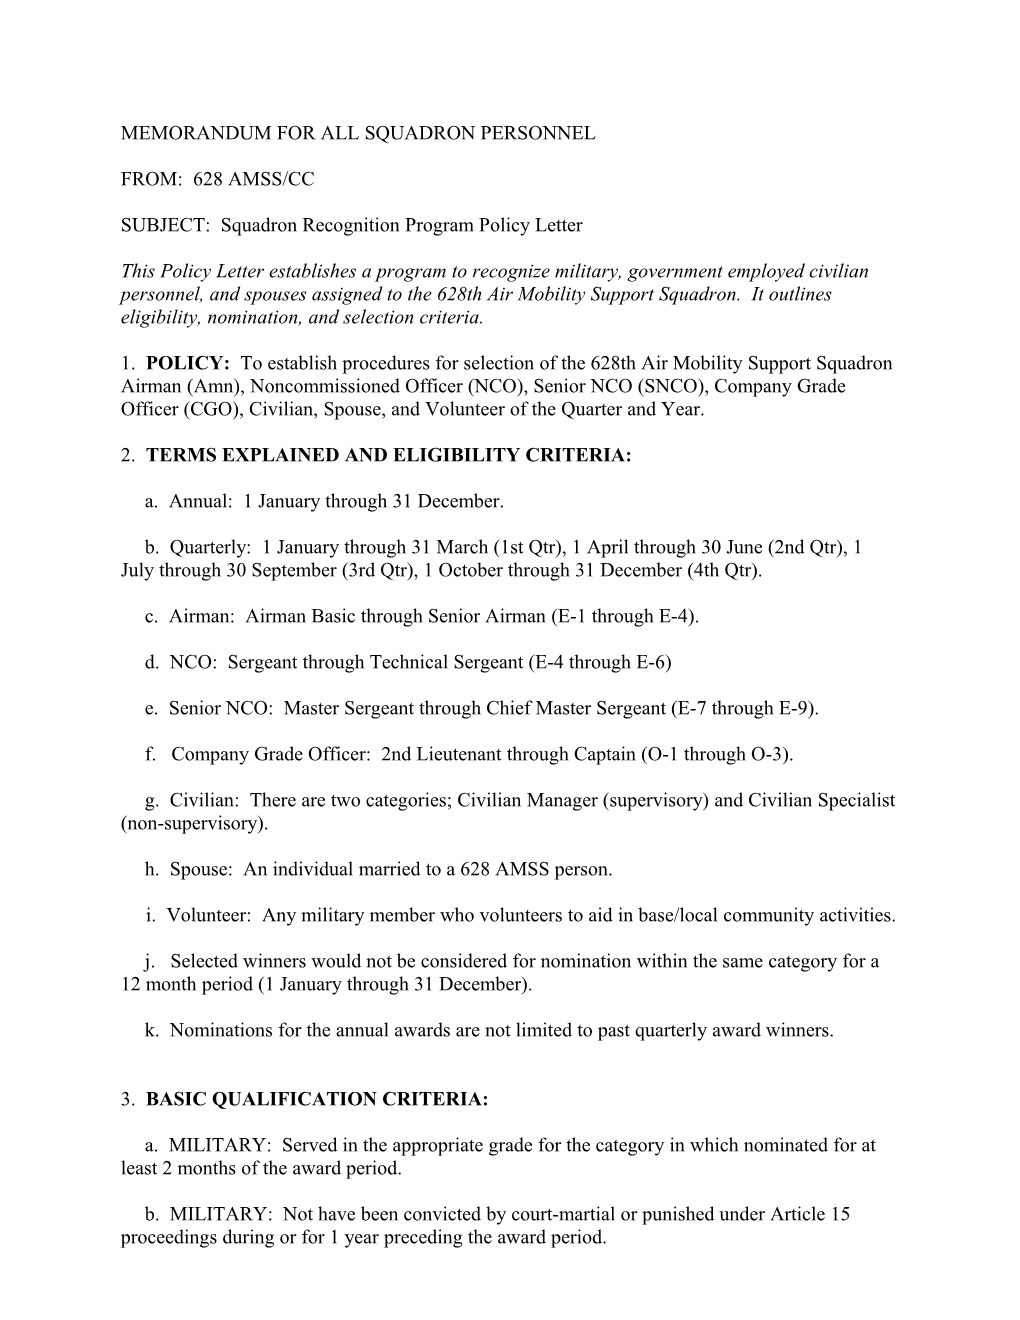 Squadron Recognition Program Policy Letter